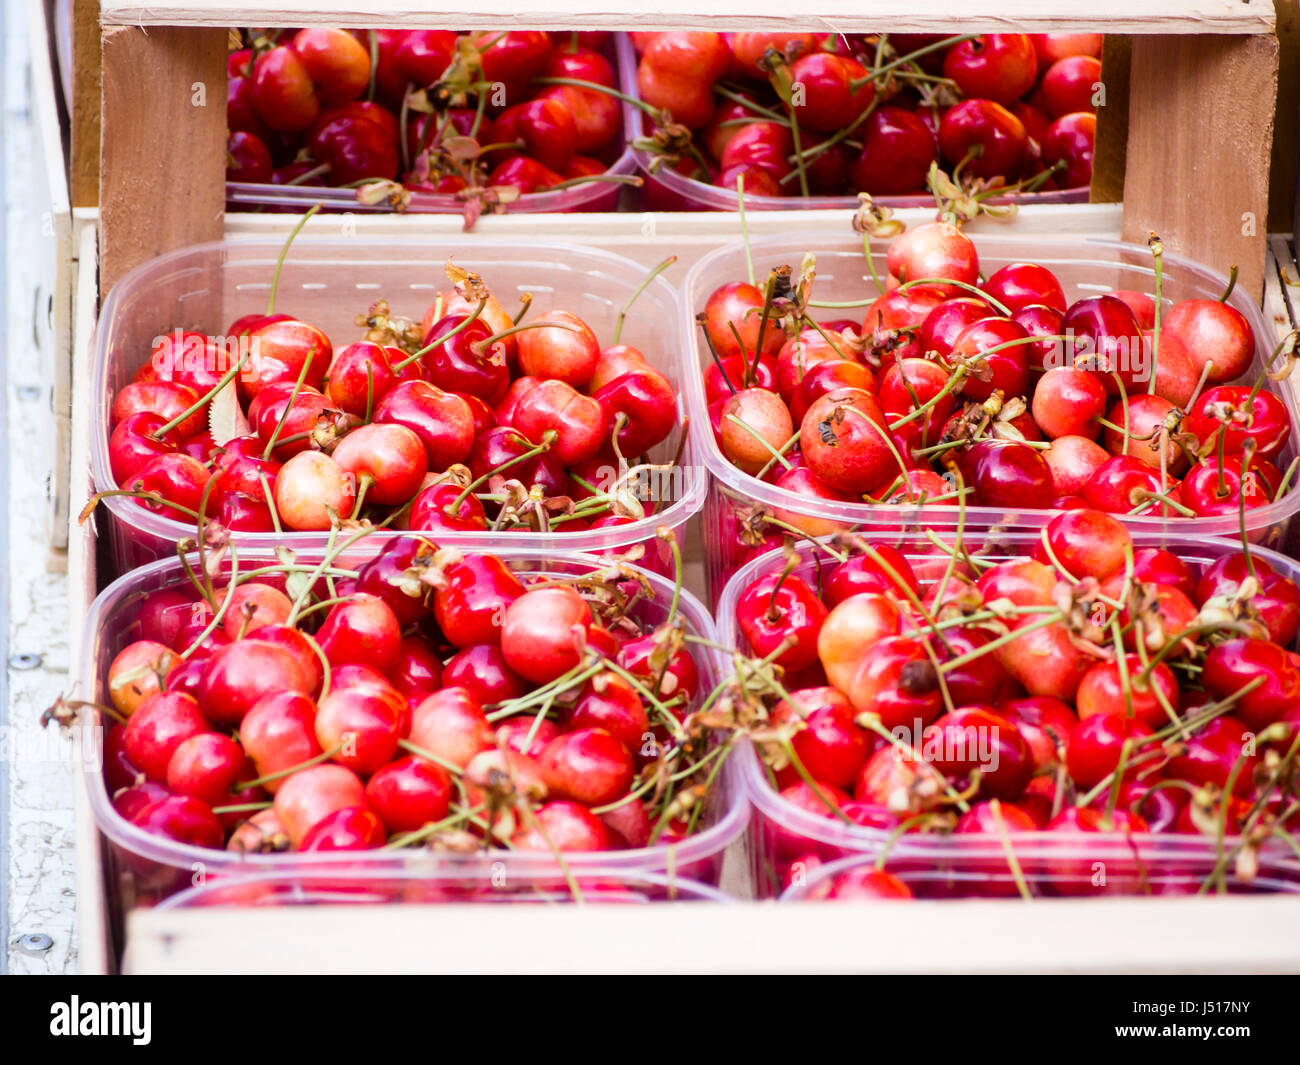 Cherries for sale - Cremona Street Market - 15th May 2017 italy Stock Photo